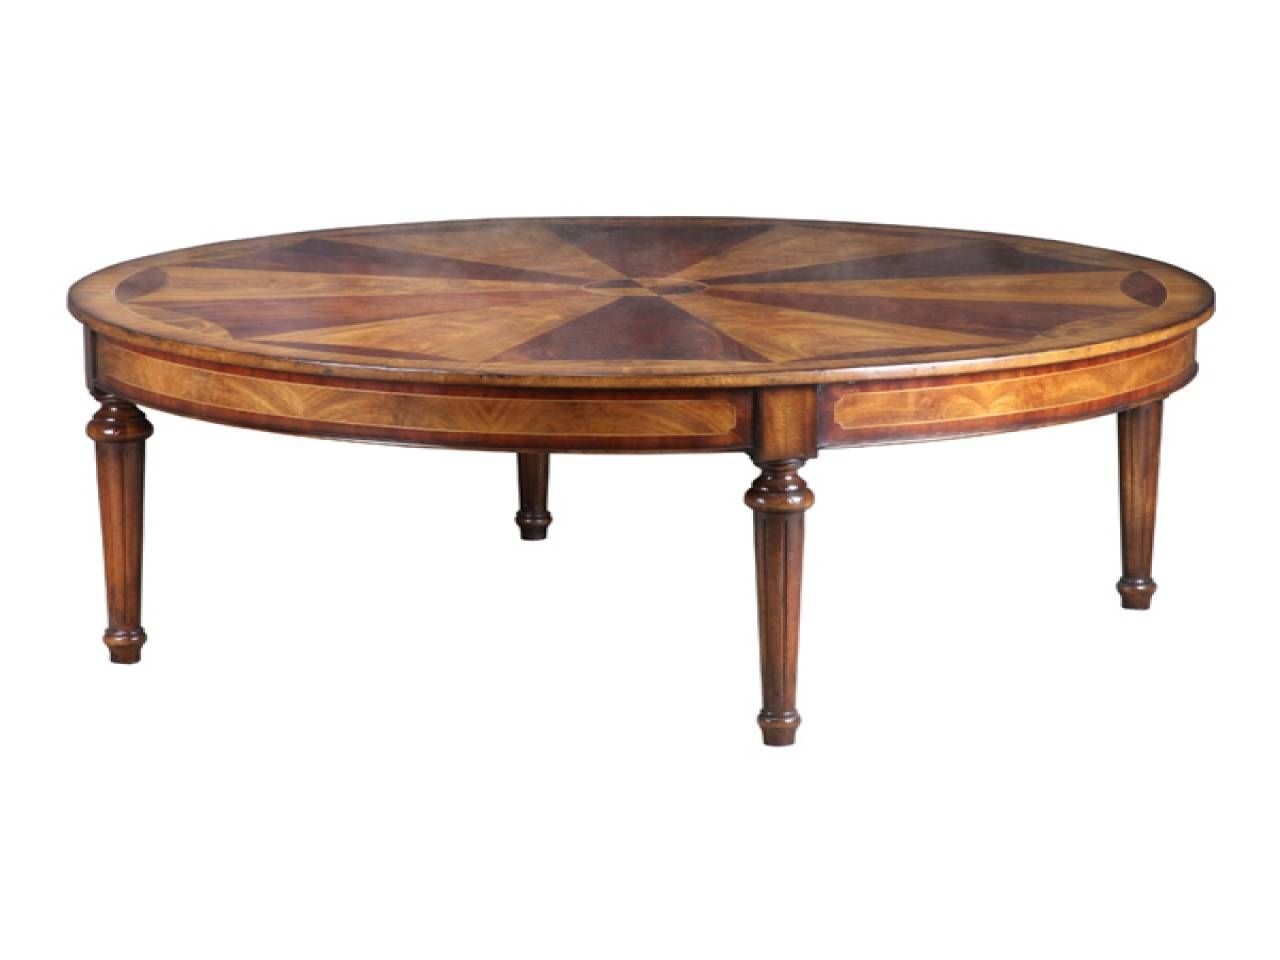 Antique Dining Room Tables, Antique Mahogany Coffee Table Antique Intended For Odd Shaped Coffee Tables (View 1 of 30)